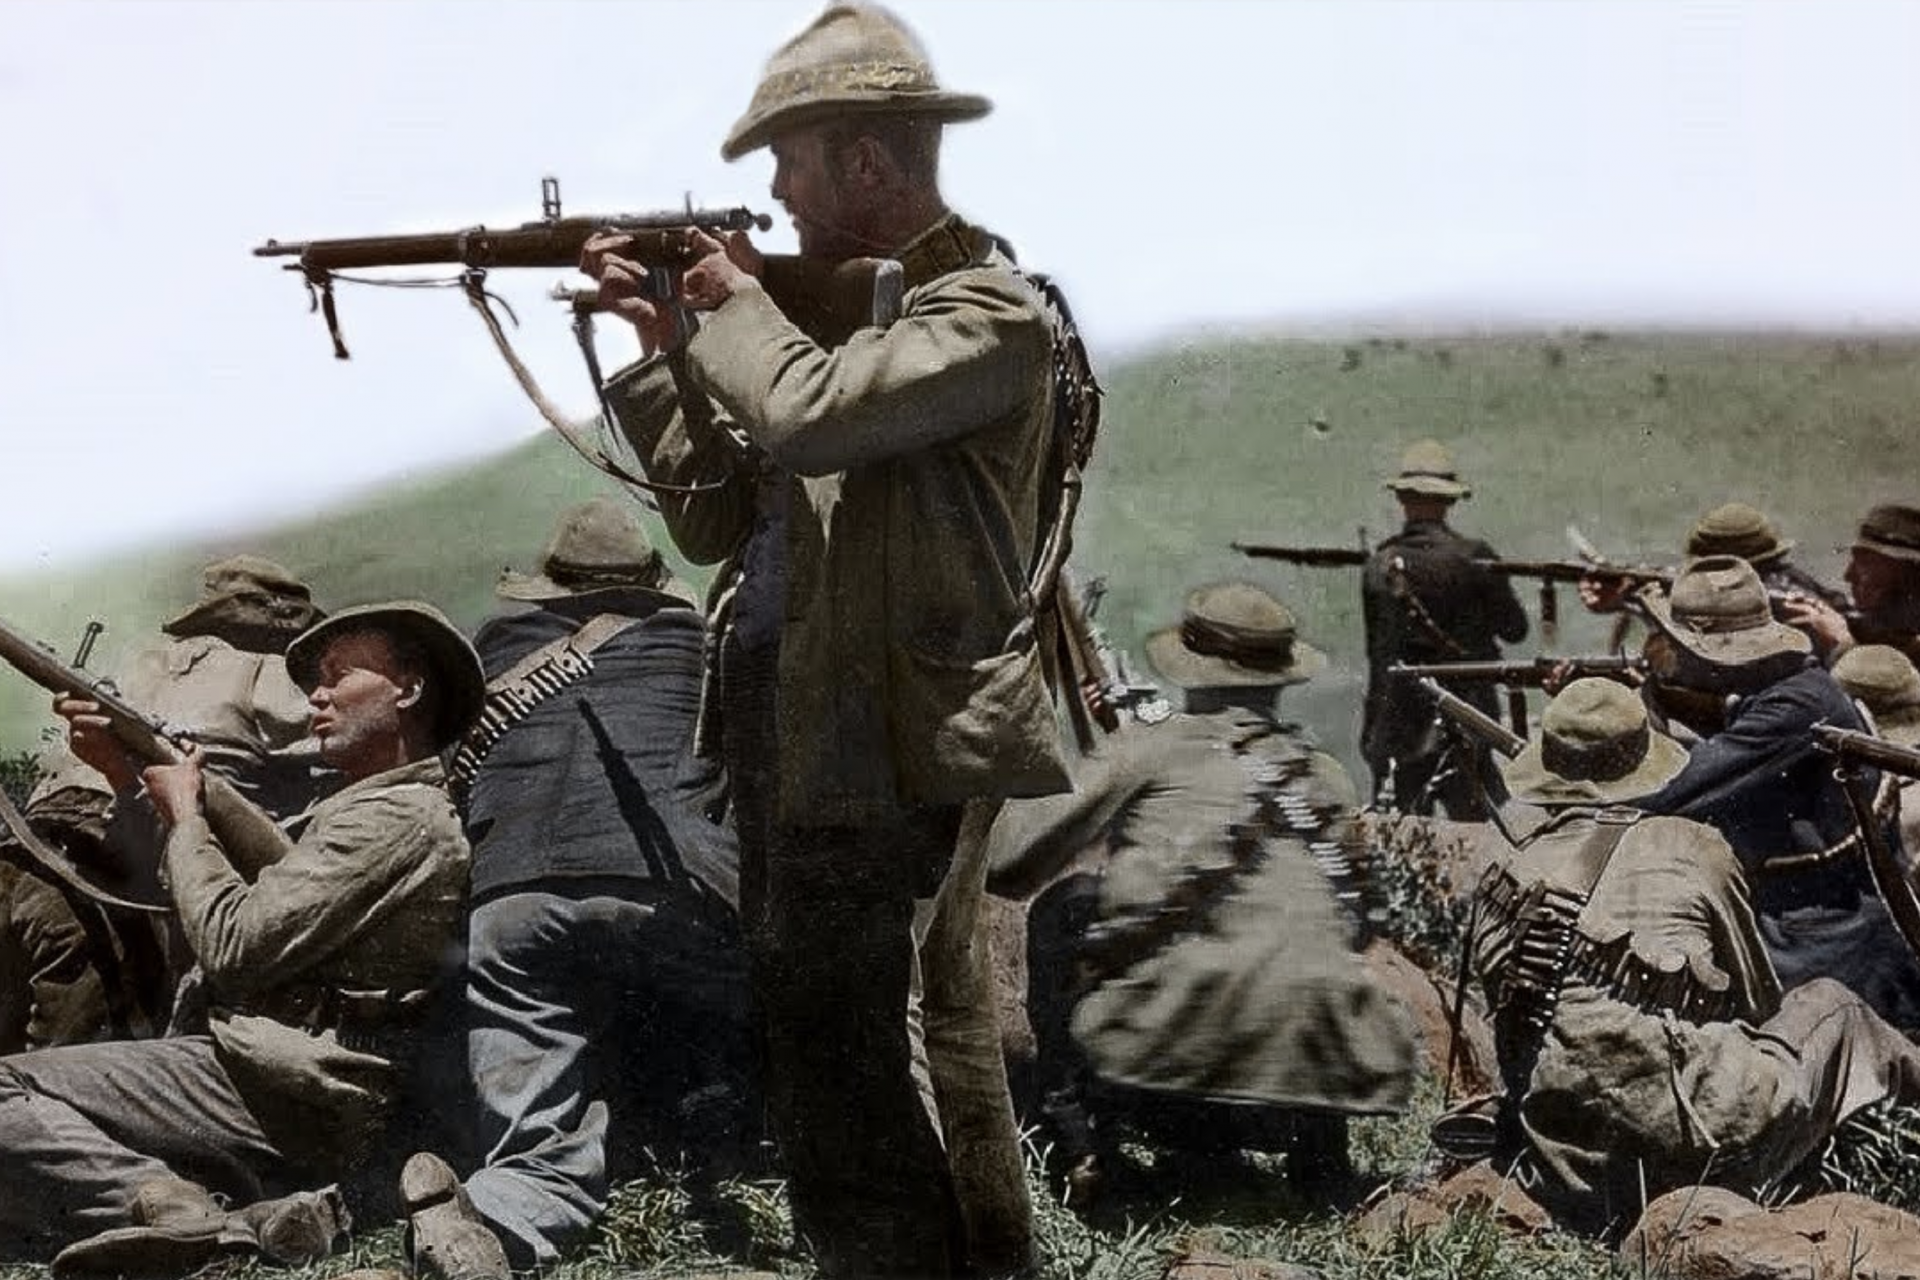 Effectively used in the Boer War 1899-1902